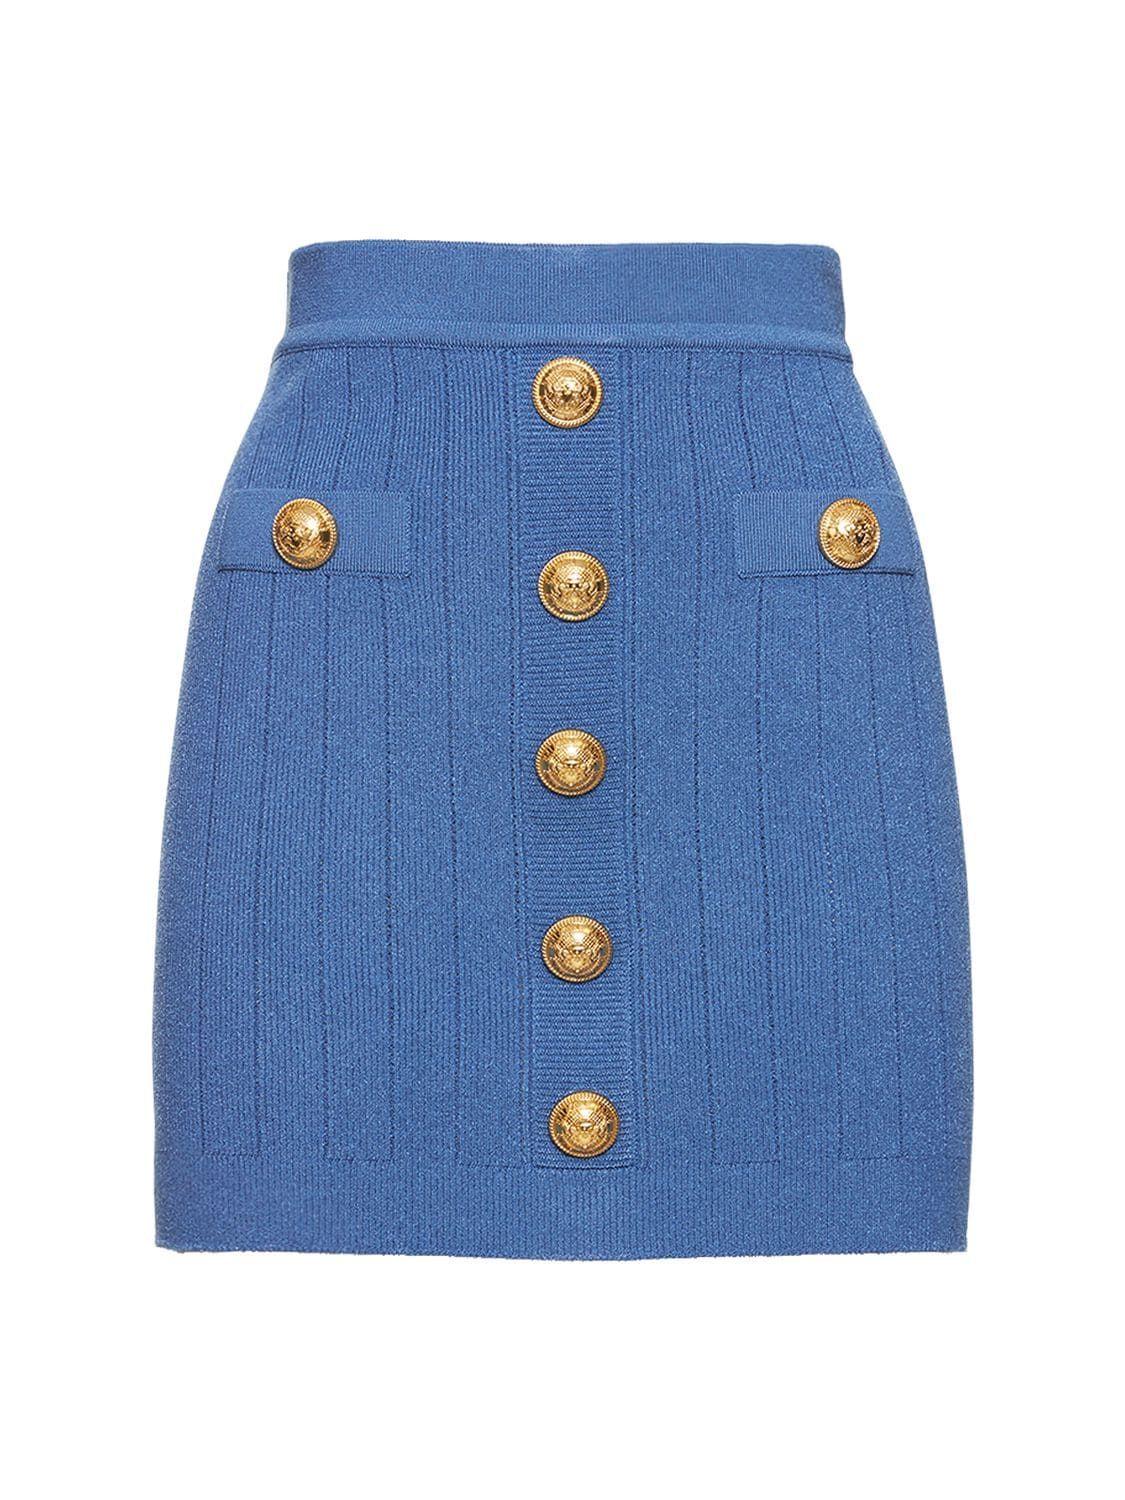 Balmain Ribbed Knit Mini Skirt W/ Buttons in Blue | Lyst